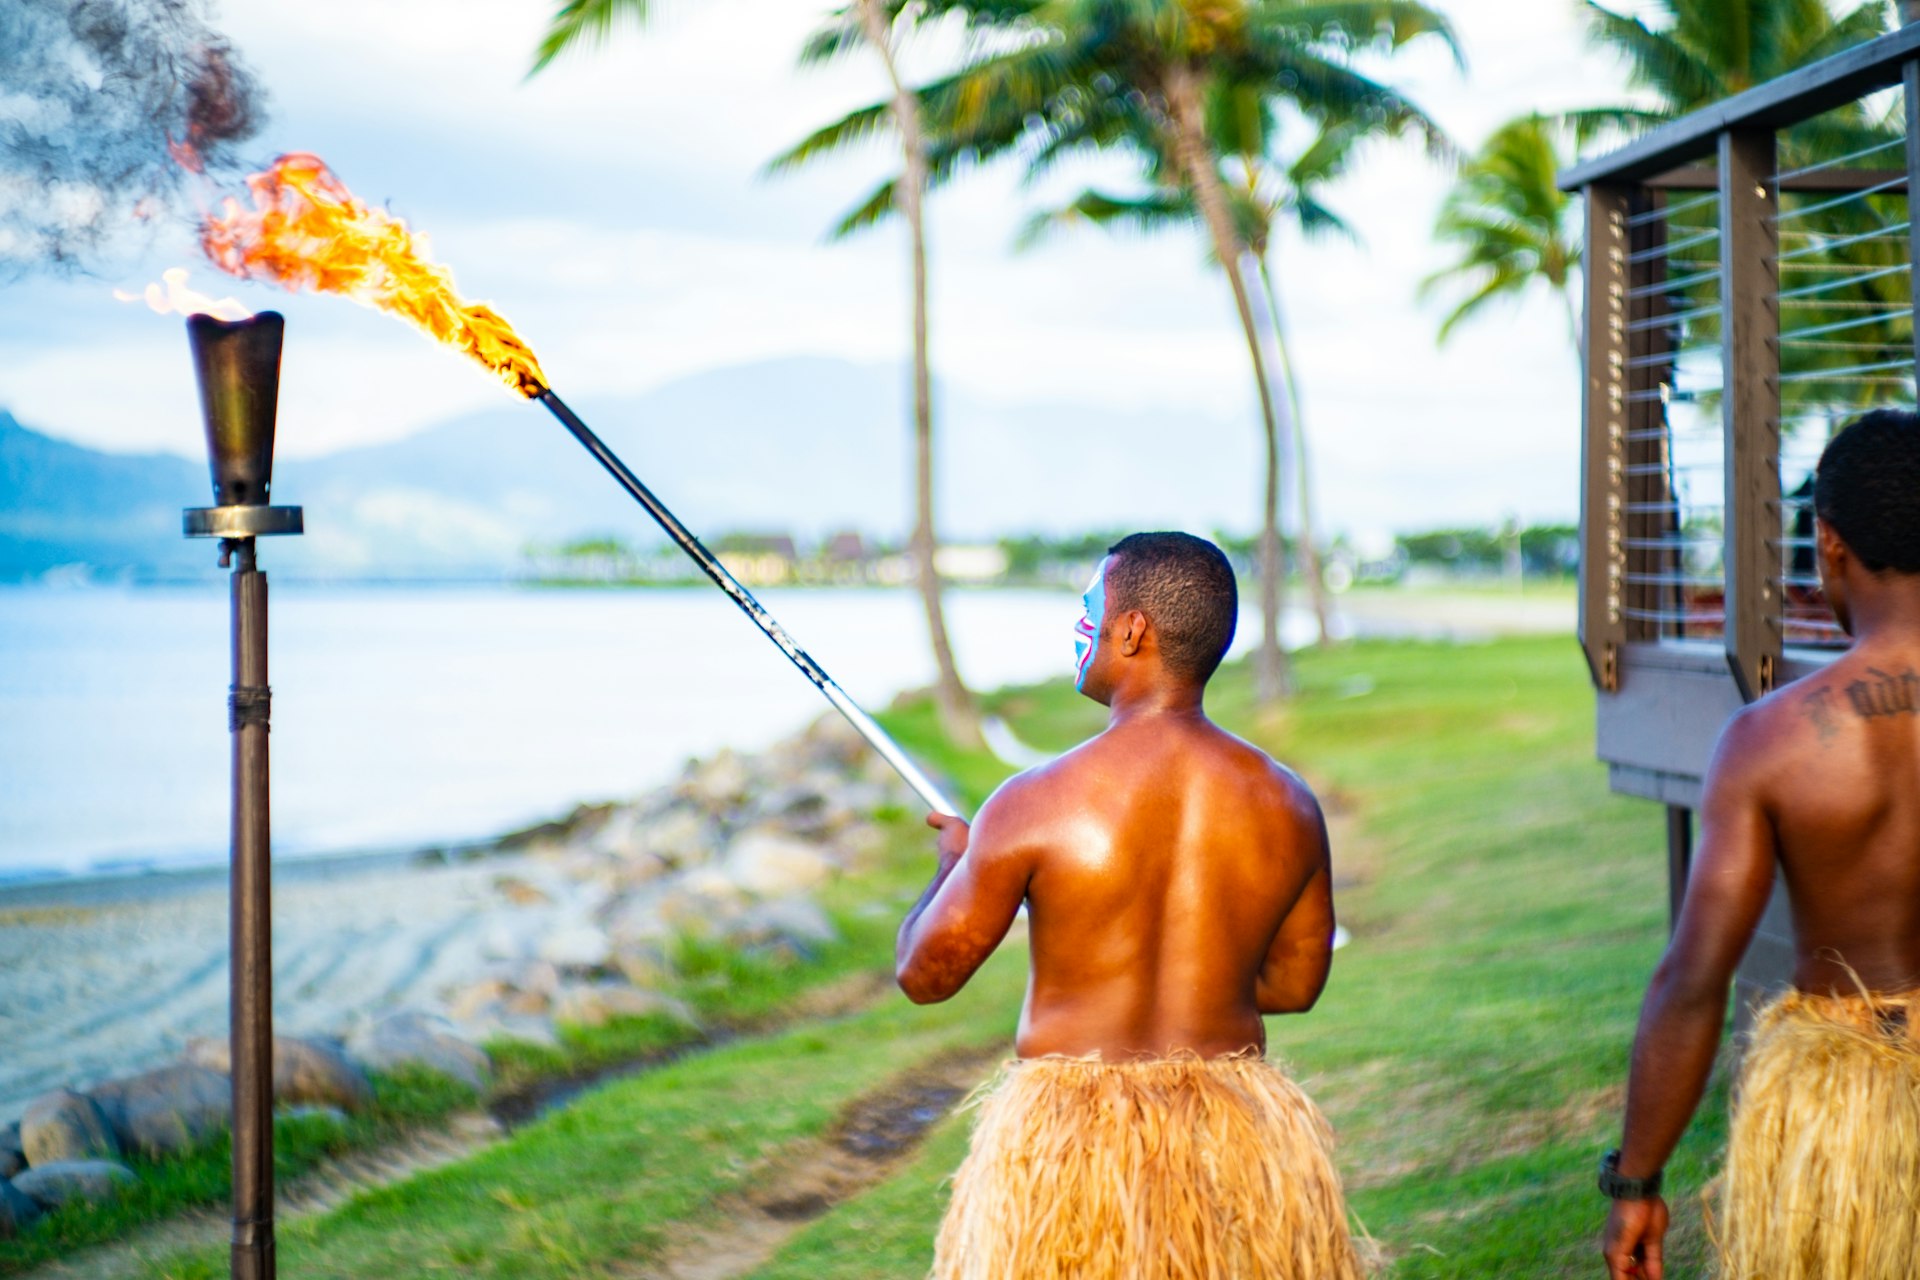  Fijian people performing the lighting of the beach torches.